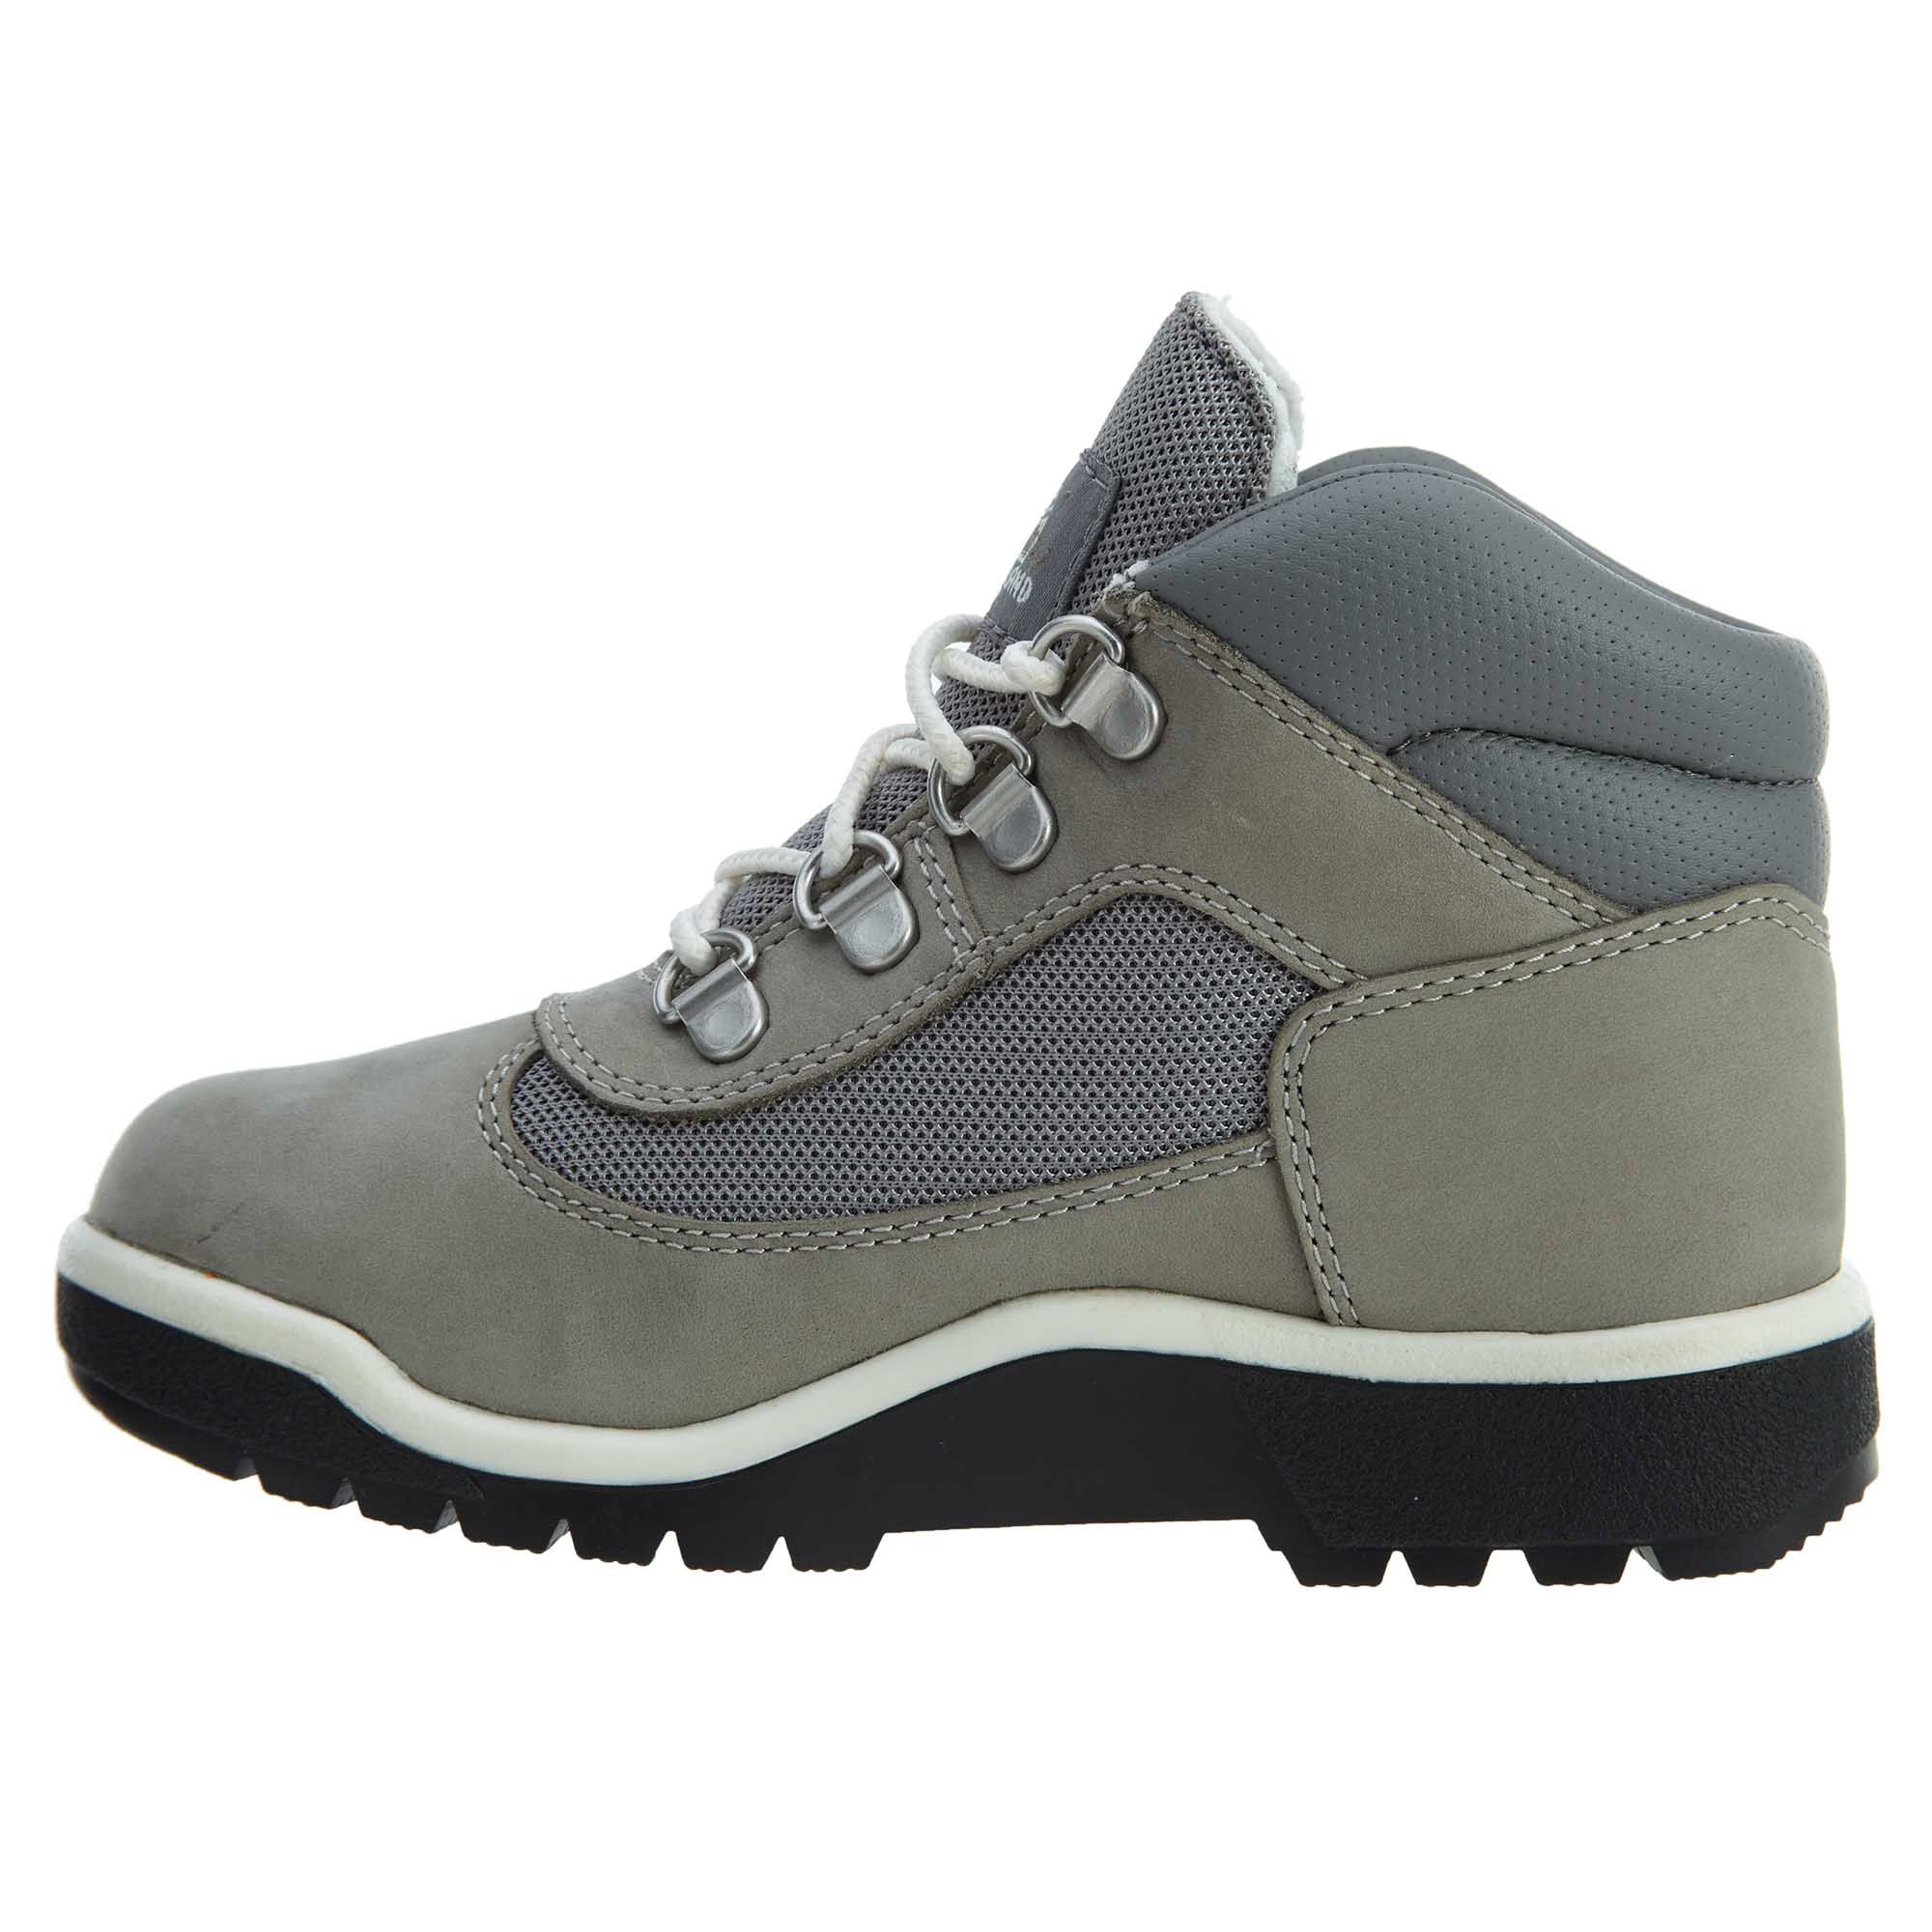 childrens grey timberland boots